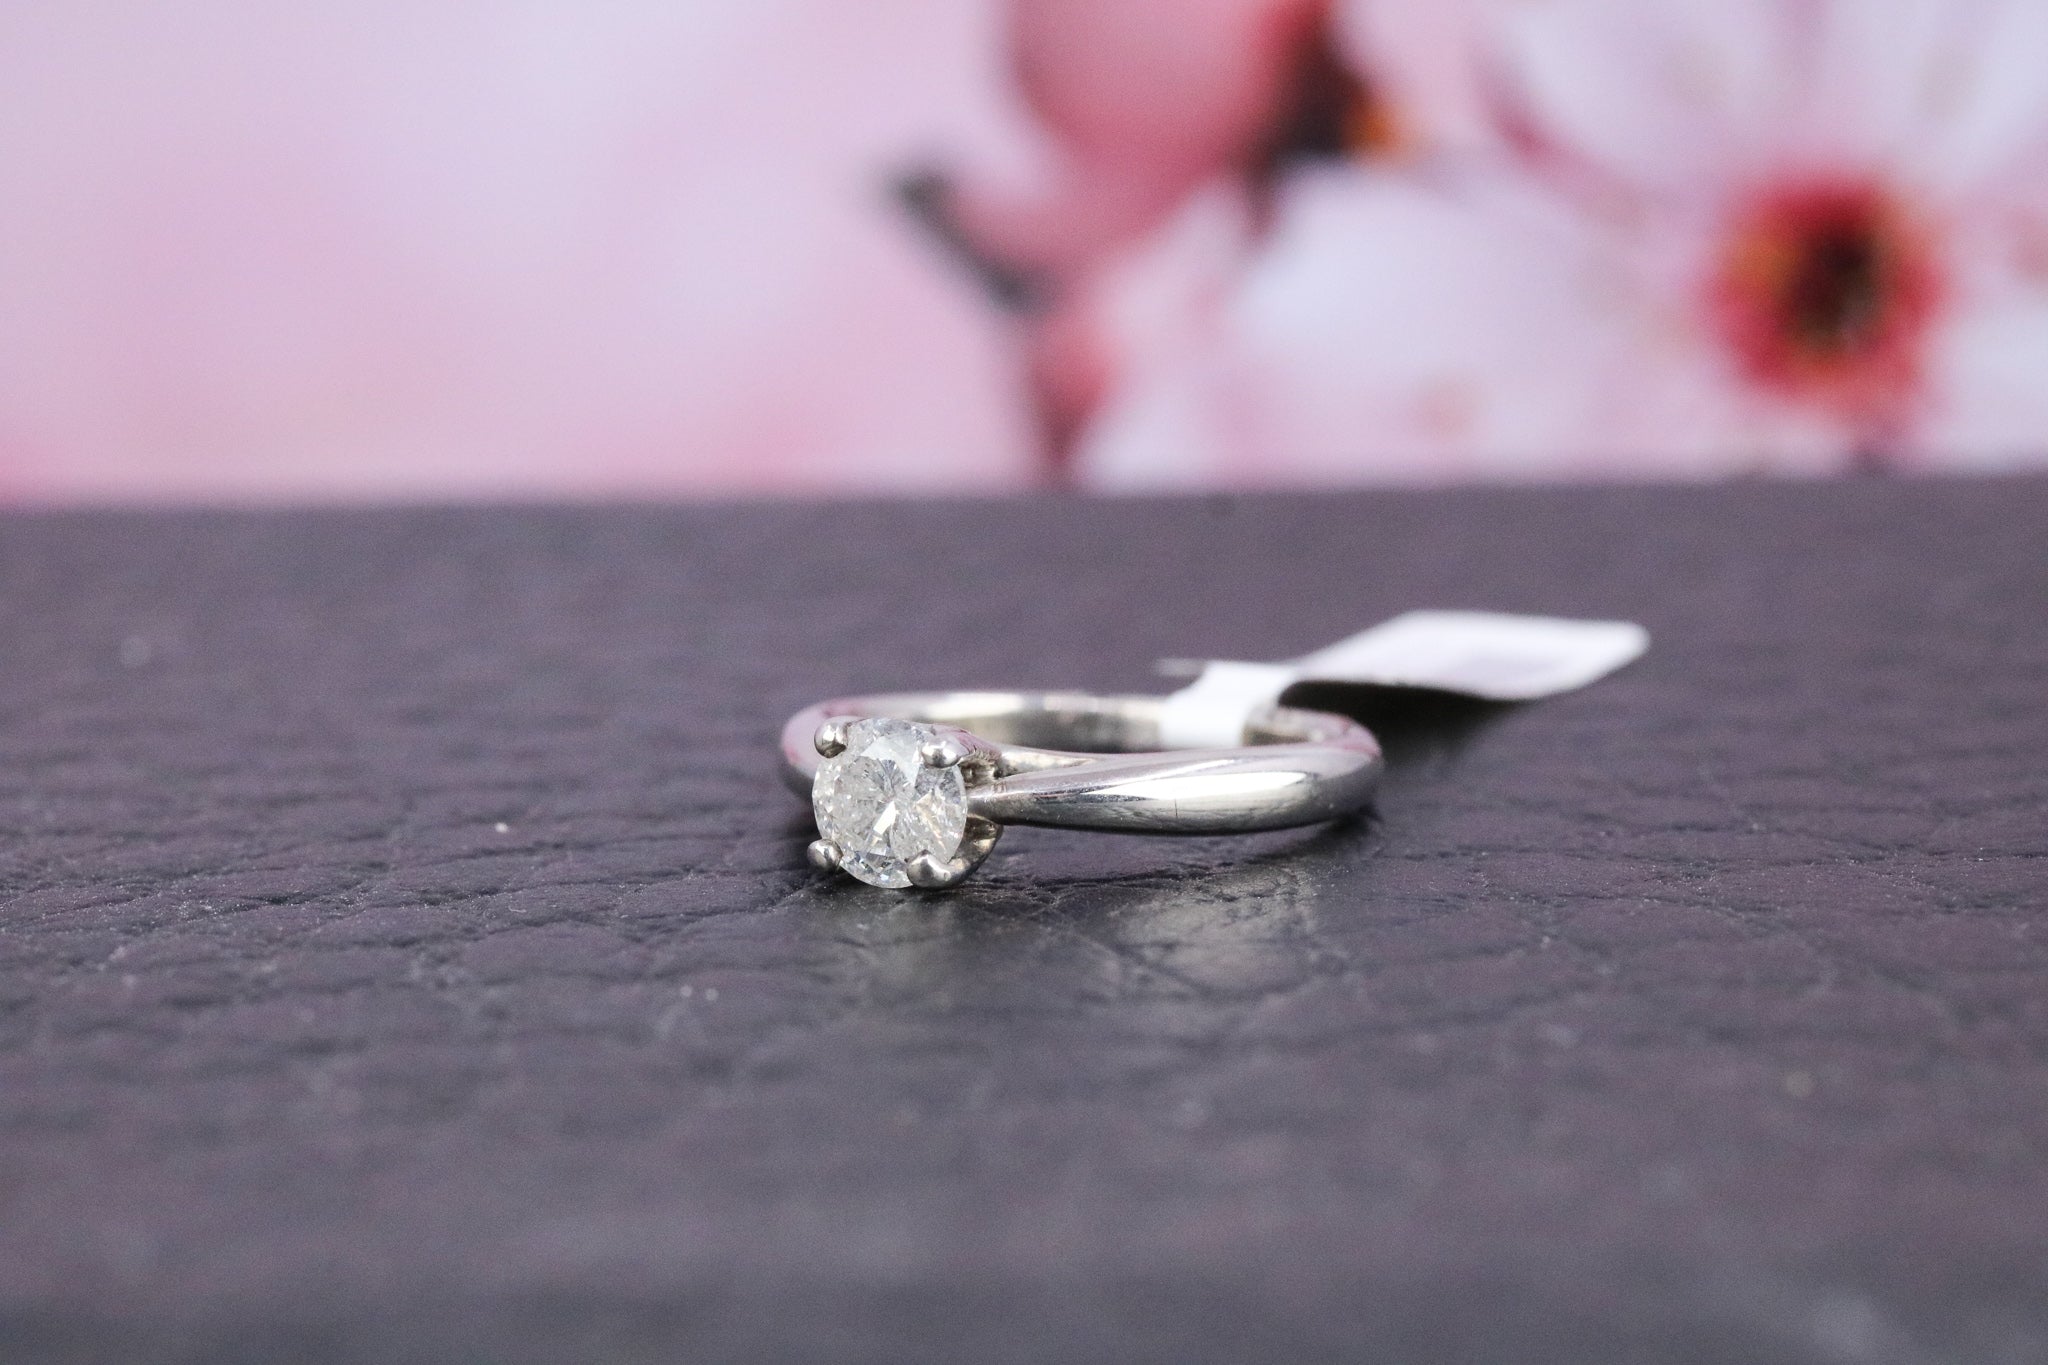 9ct White Gold Diamond Ring - HJ2282 - Hallmark Jewellers Formby & The Jewellers Bench Widnes